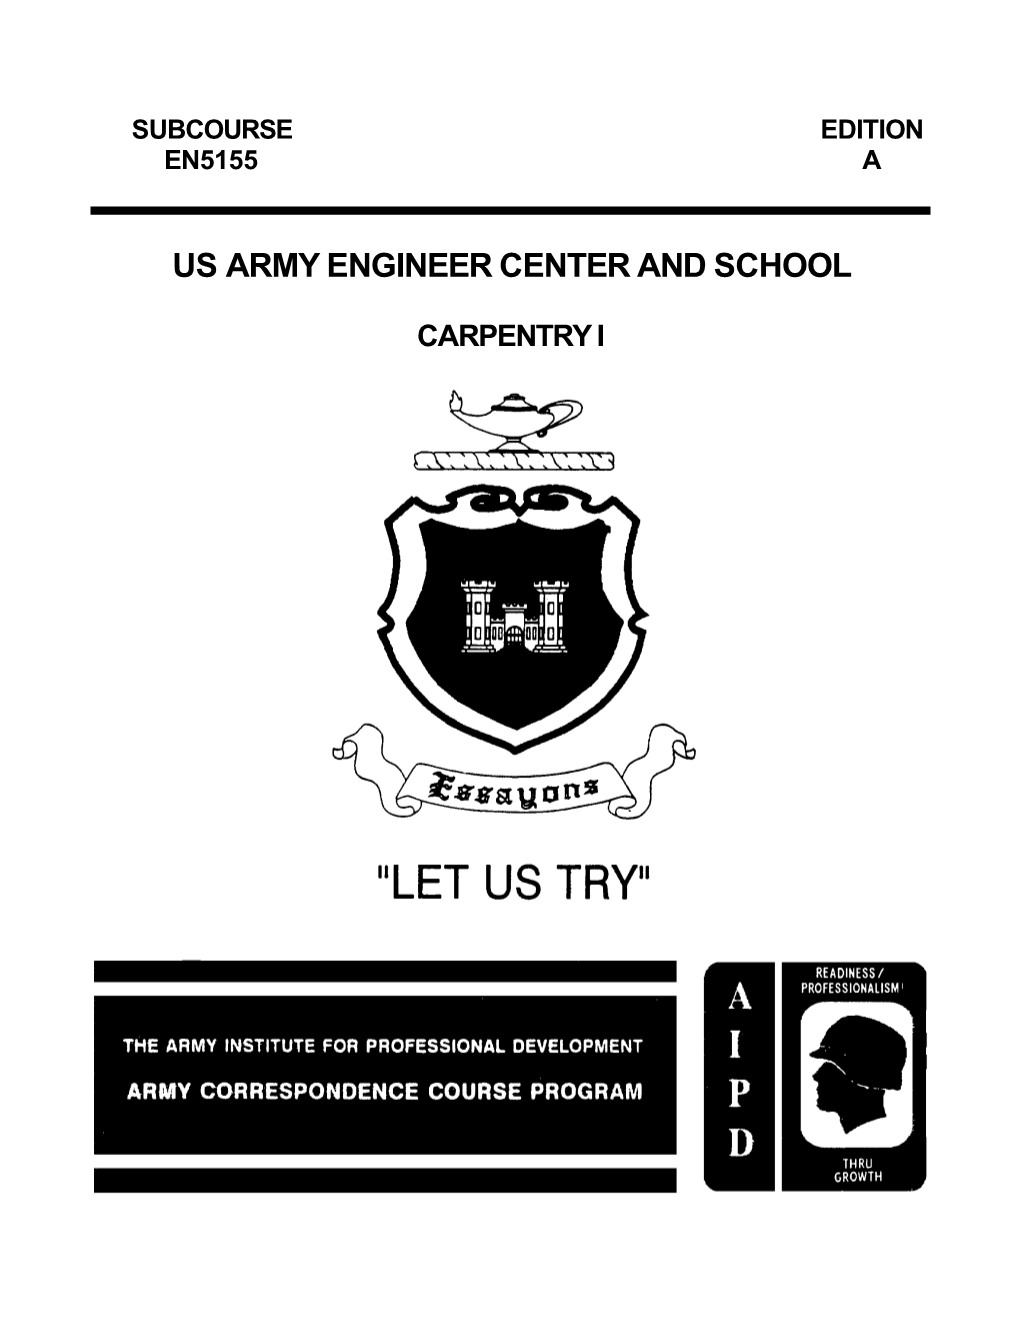 US Army Engineer Course Carpentry I EN5155